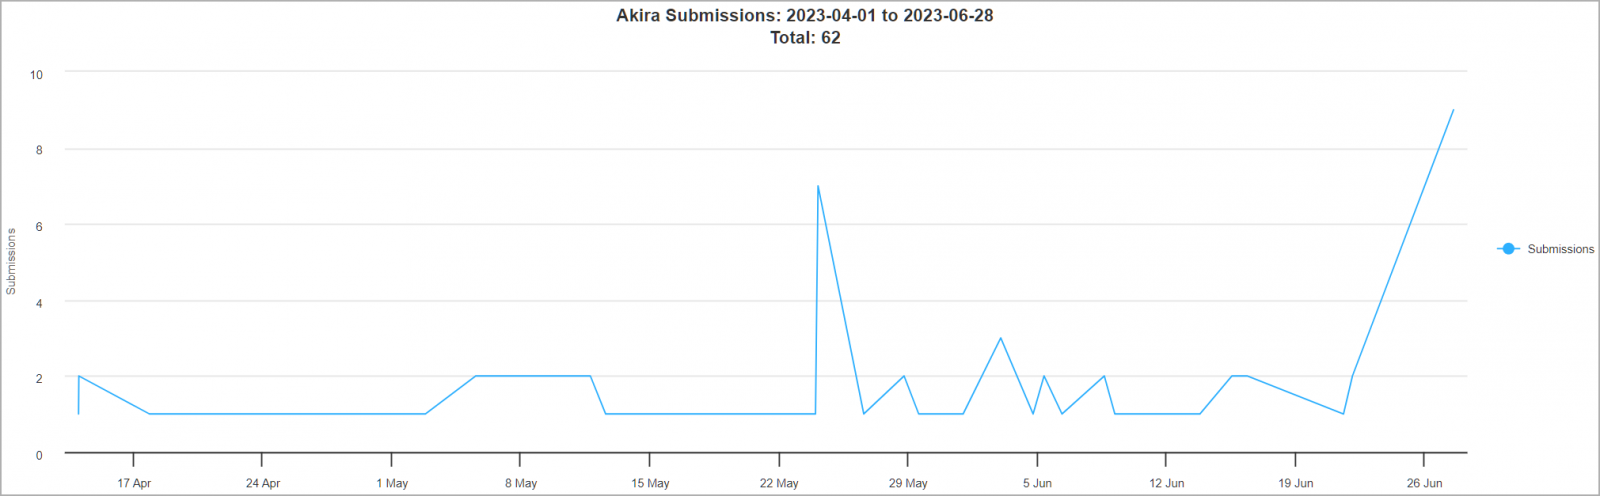 Akira's activity over the past few months